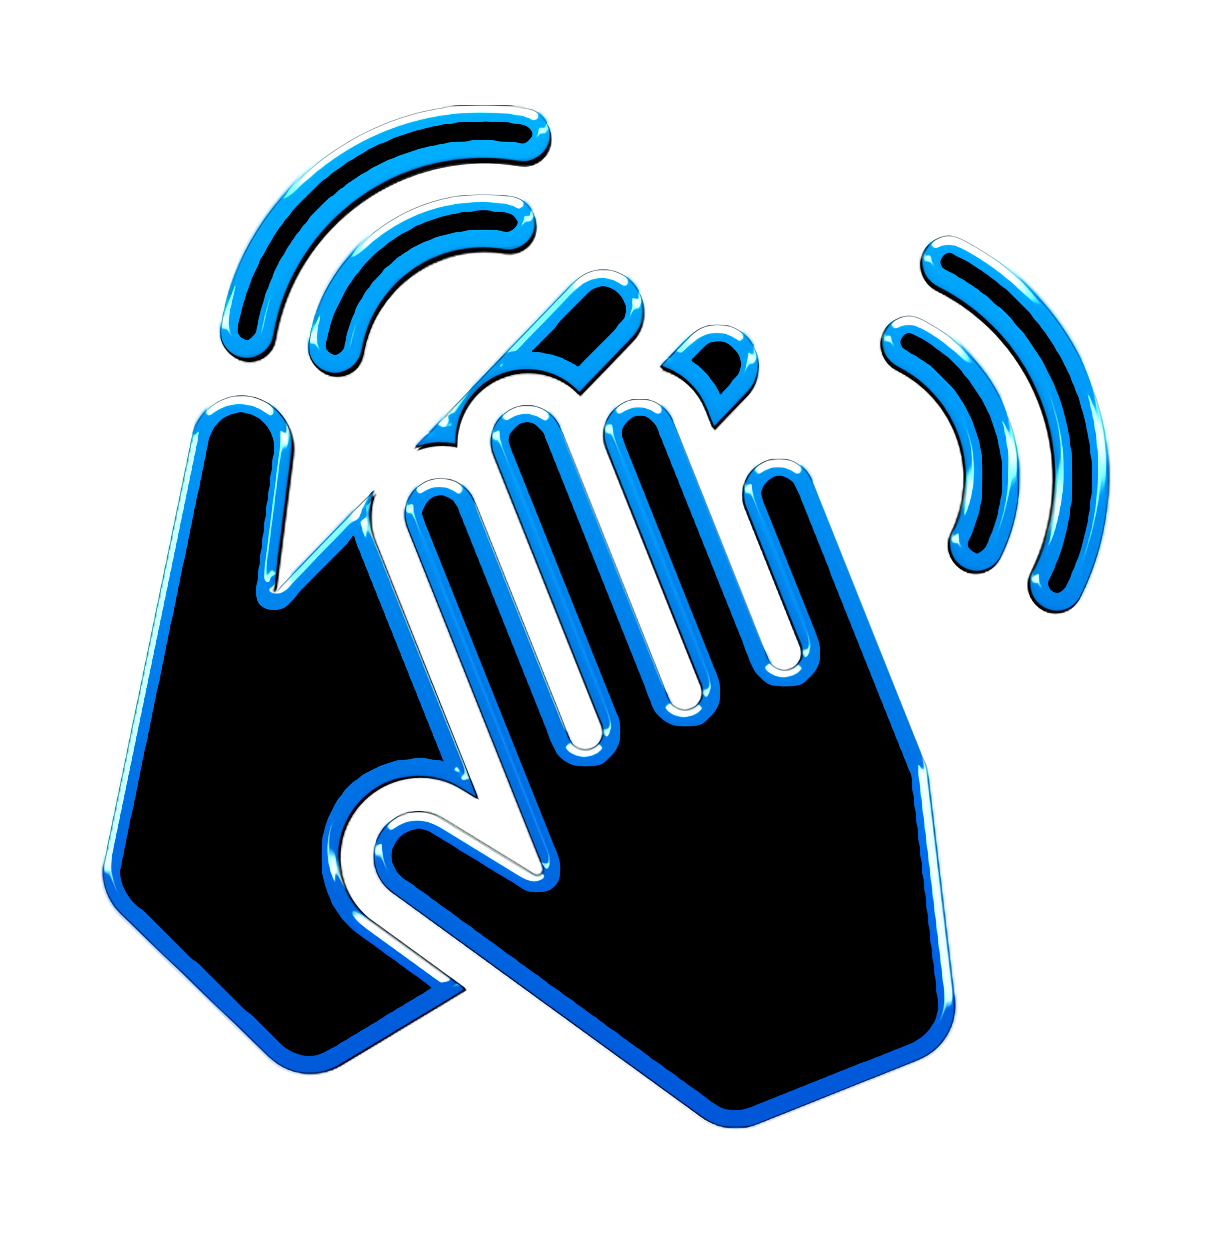 gestures icon Claping Hands icon Birthday party icon Clipart